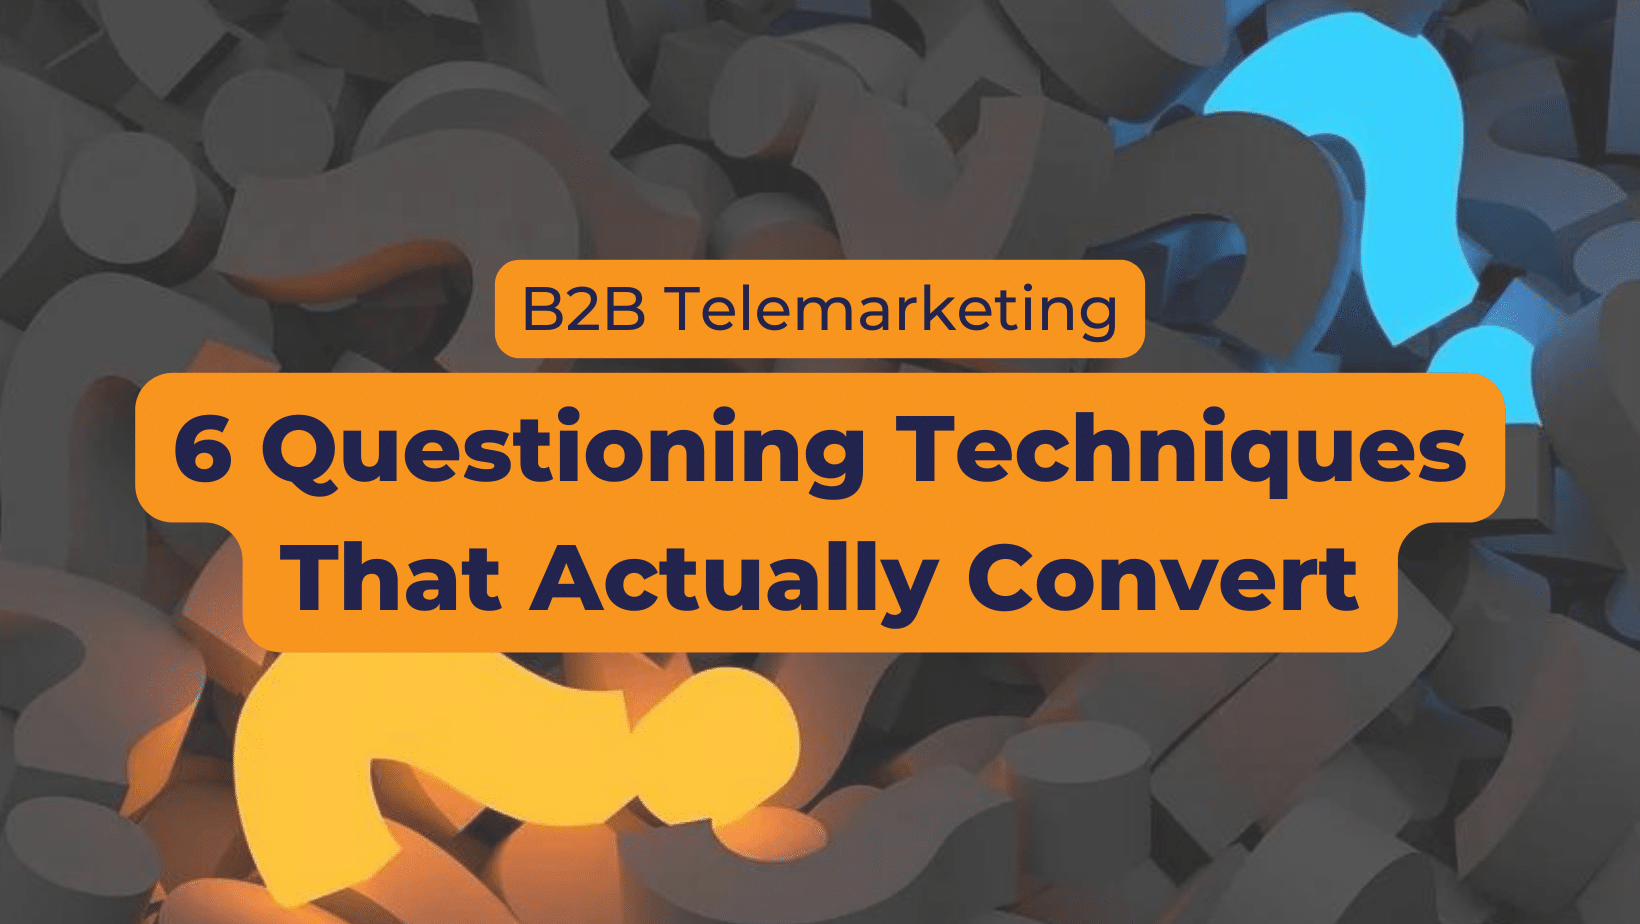 B2B Telemarketing: 6 Questioning Techniques That Actually Convert